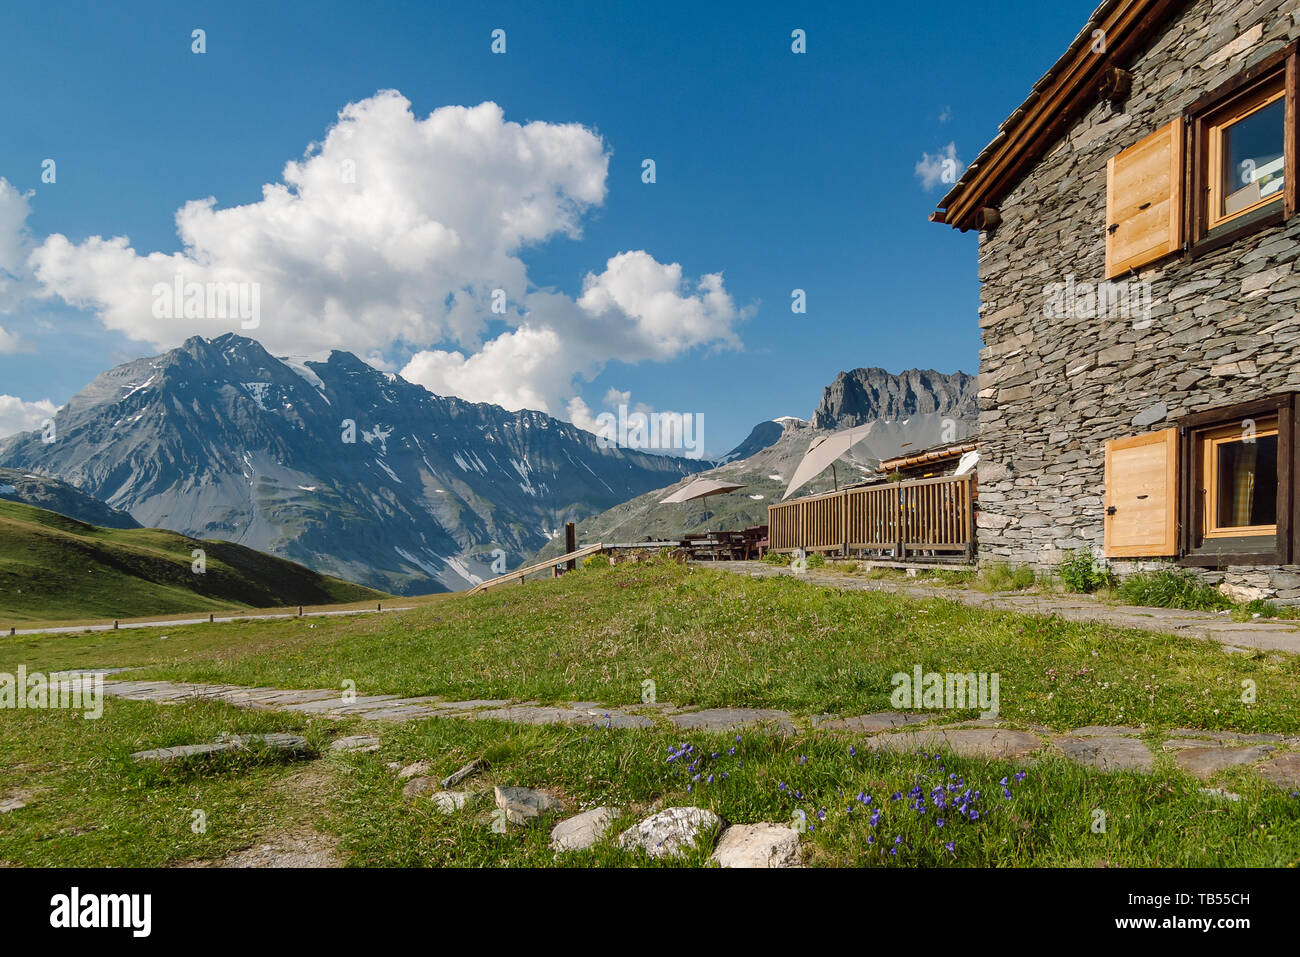 Summer Alpine landscape with mountain refuge hut (Refuge du Plan du Lac) in the Vanoise National Park, French alps. View of Grande Casse Мountain. Stock Photo